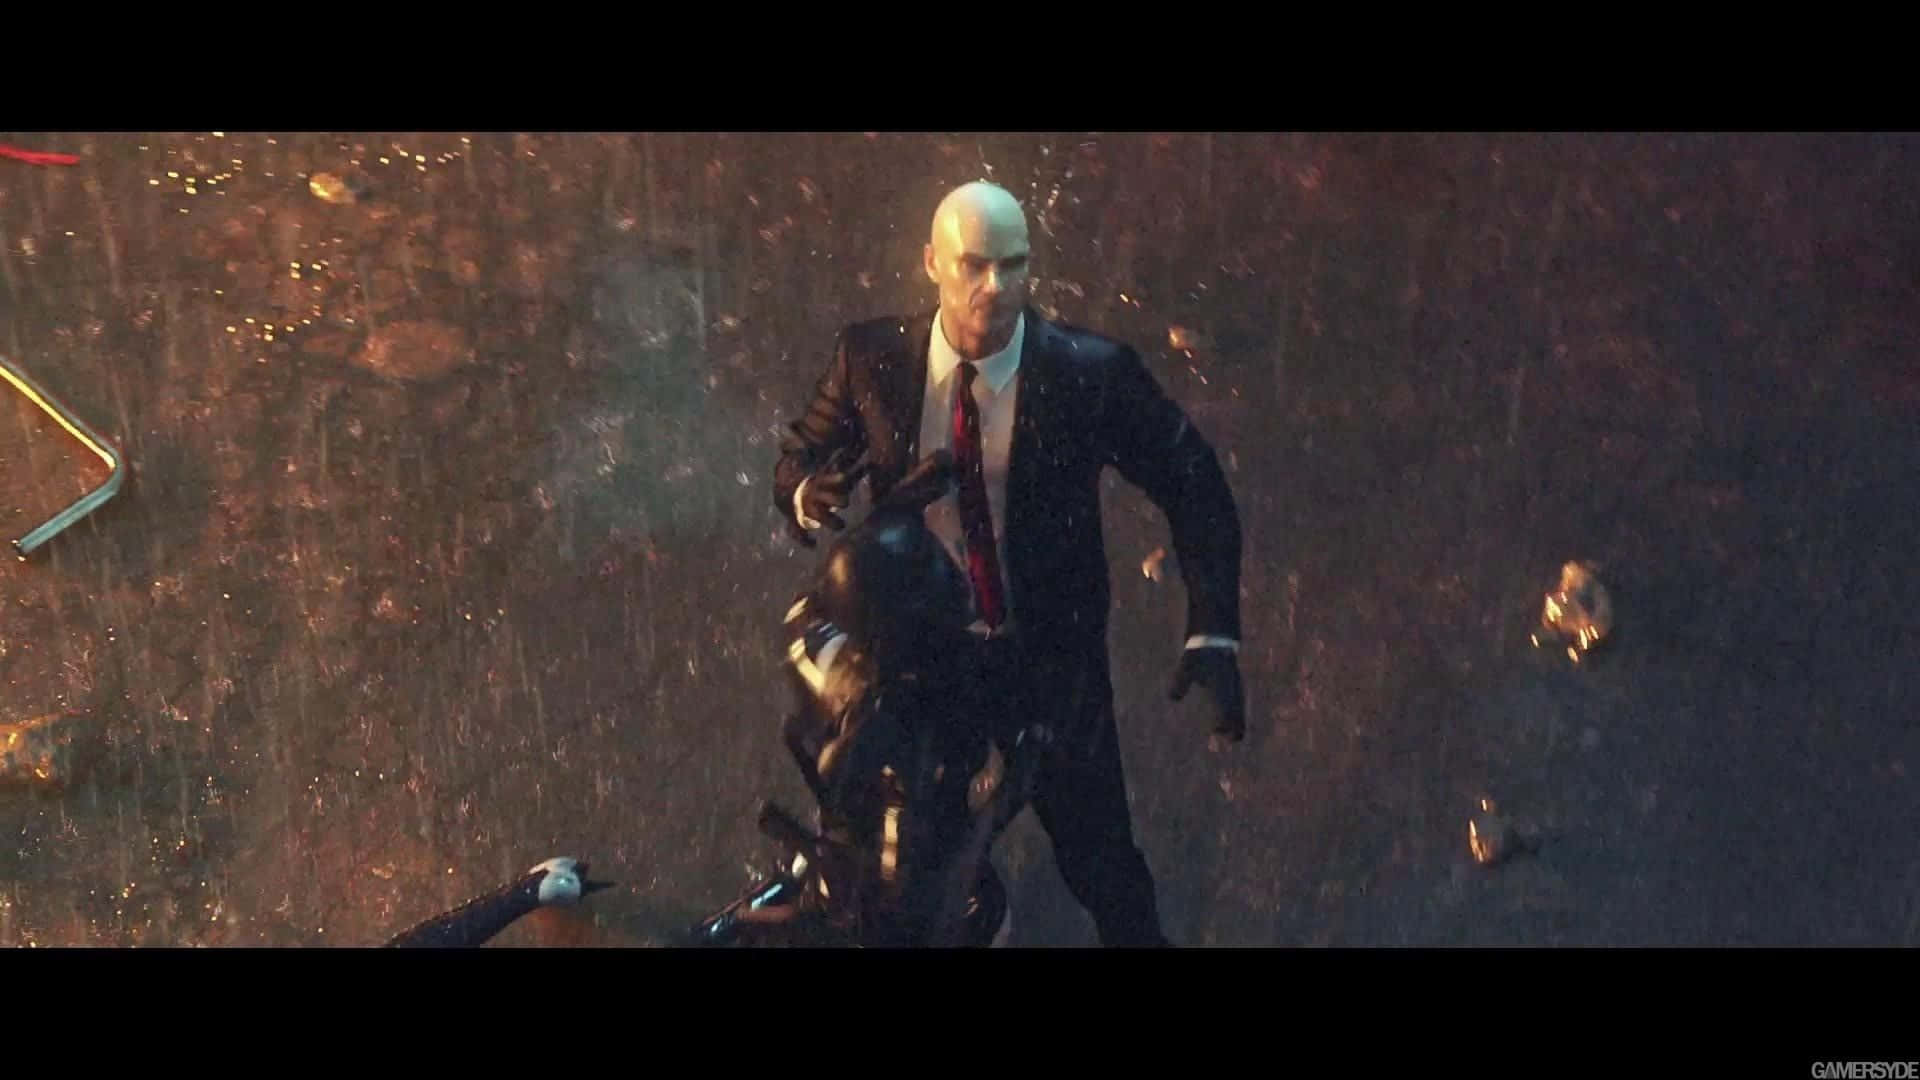 "Ready your weapons! Join Agent 47 as you infiltrate, assassinate and complete your mission in Hitman: Absolution."